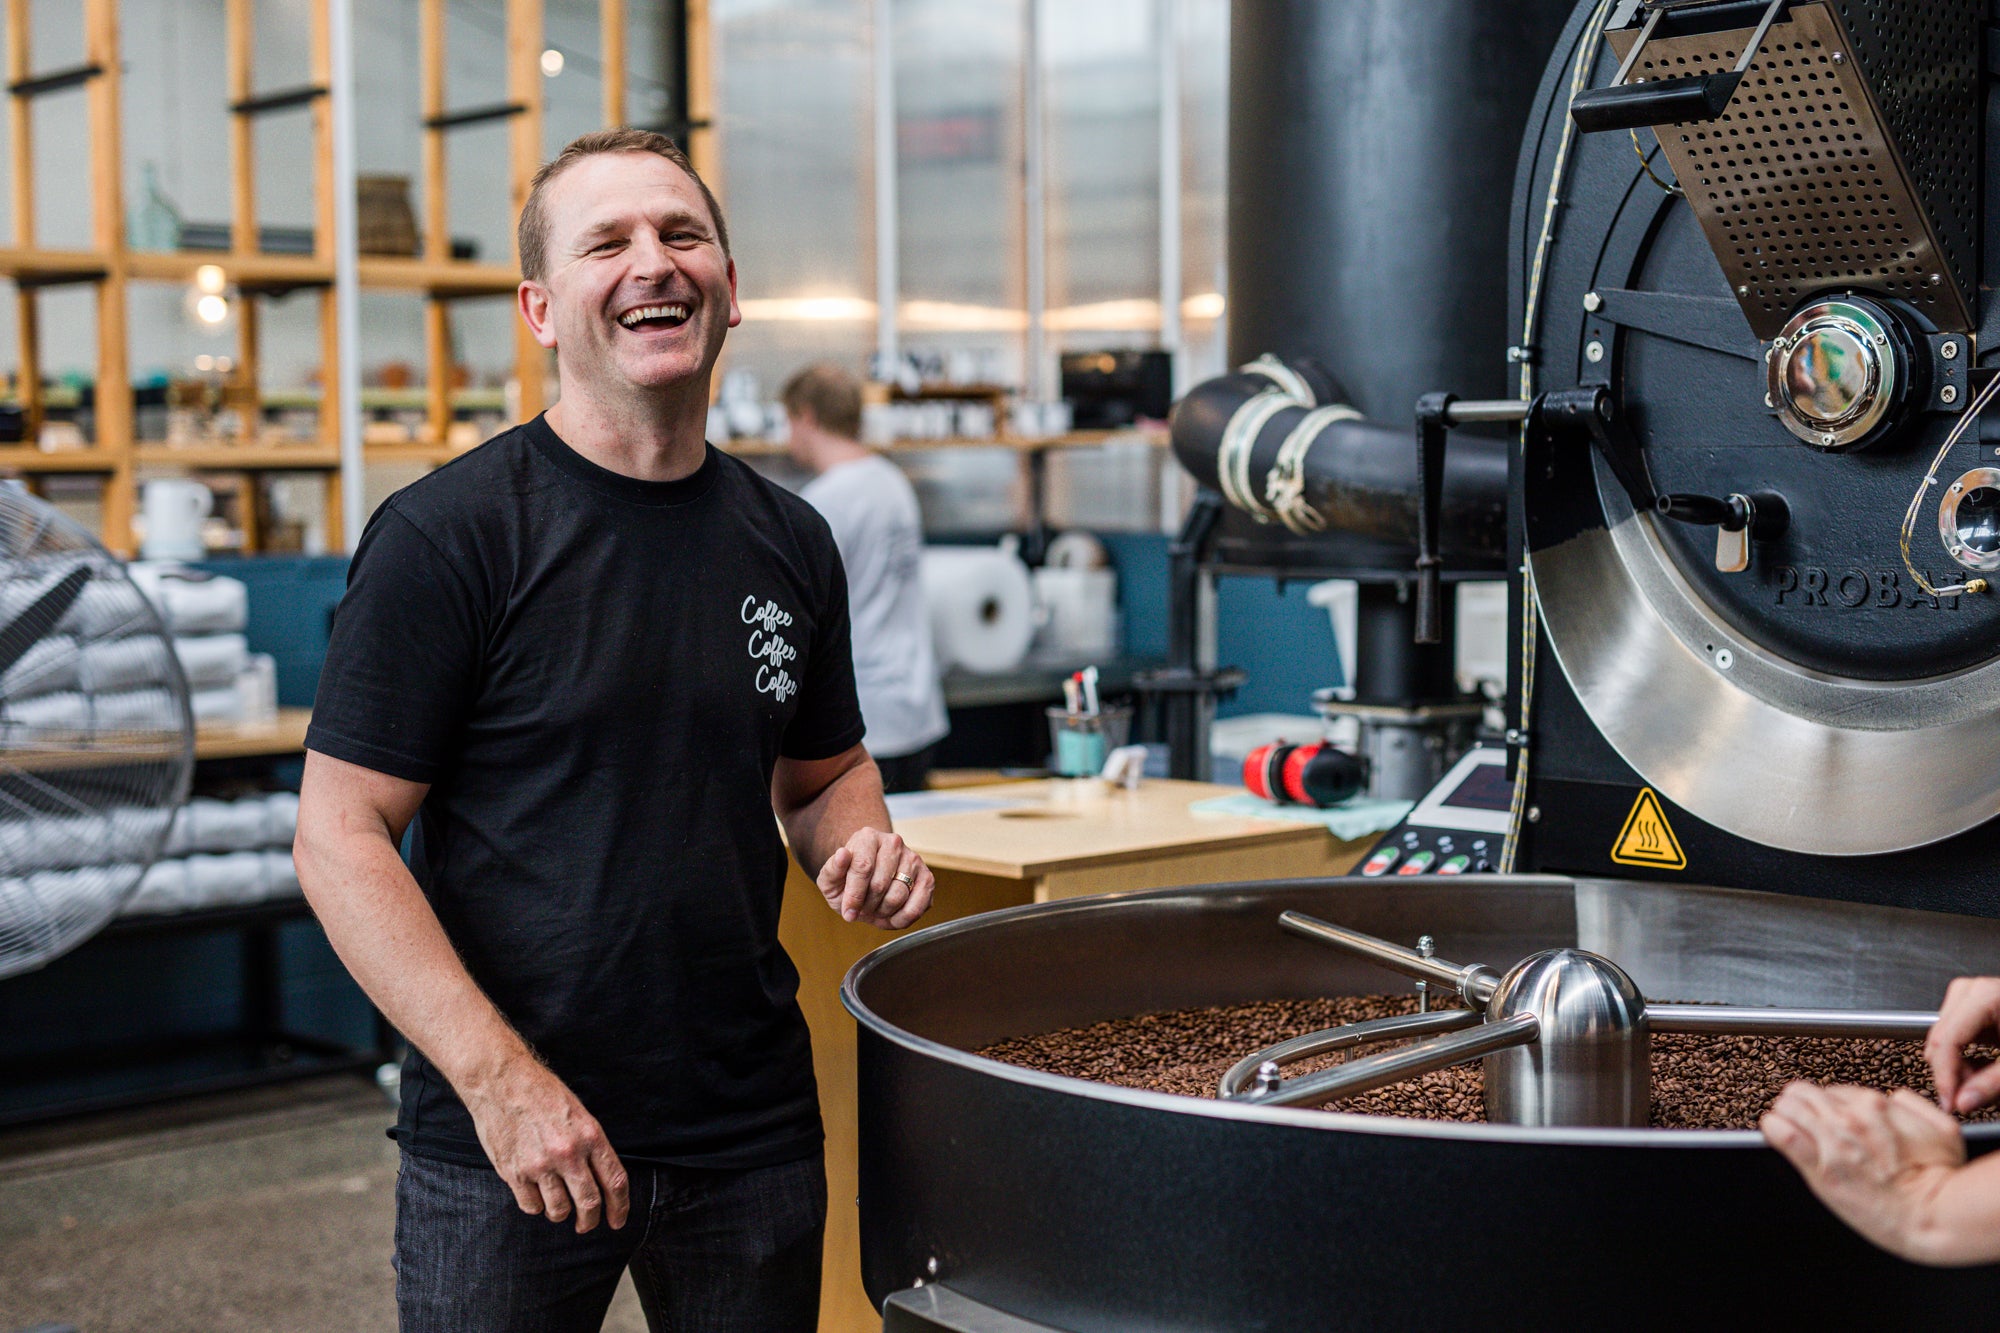 Head roaster Andy standing next to the roasting drum with a big smile on his face.